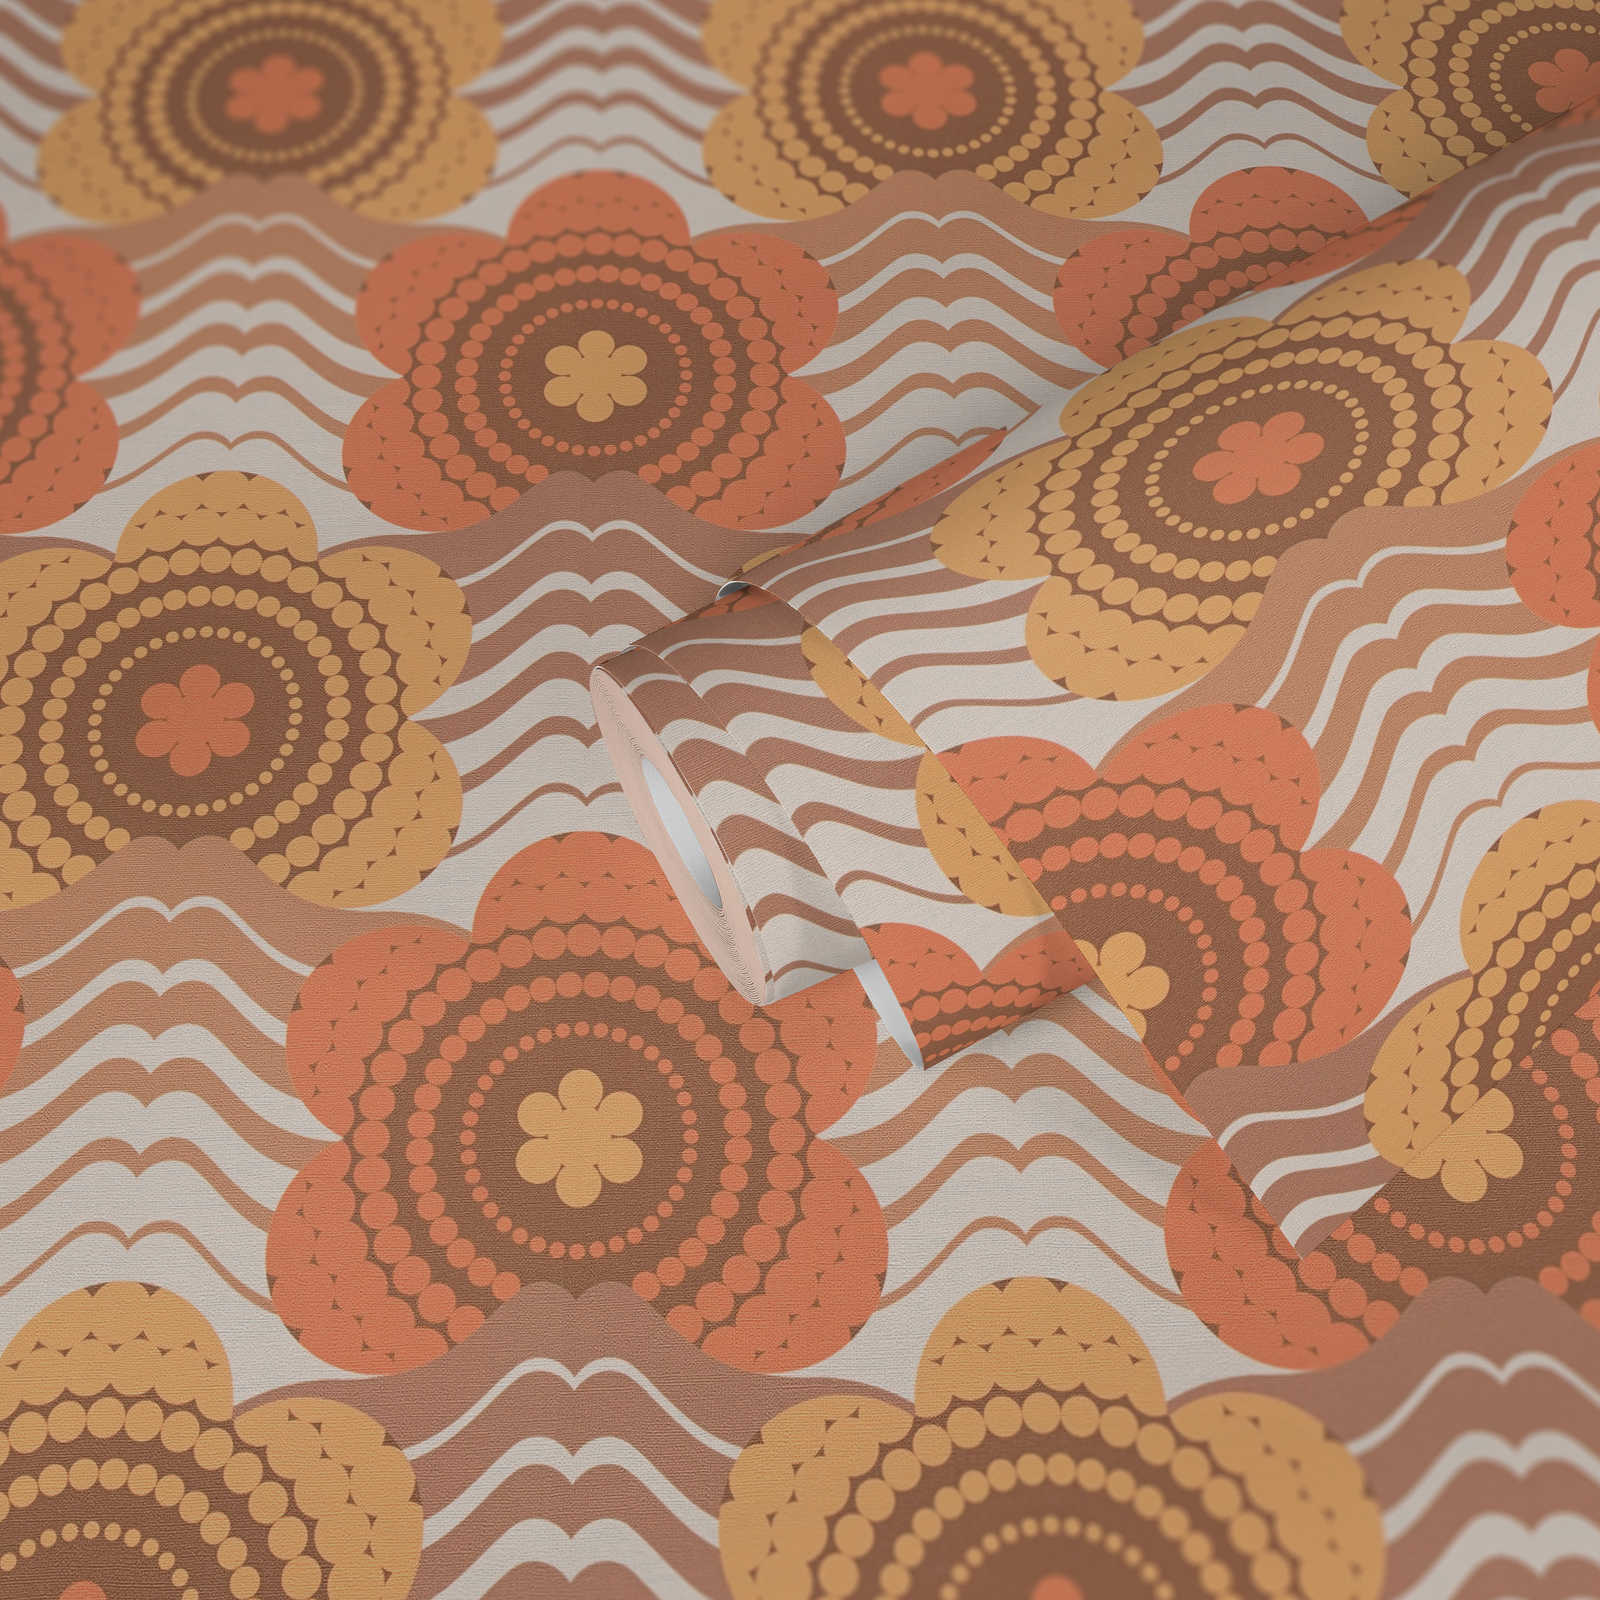             Floral pattern in dots design in the style of the 70s - brown, orange, yellow
        